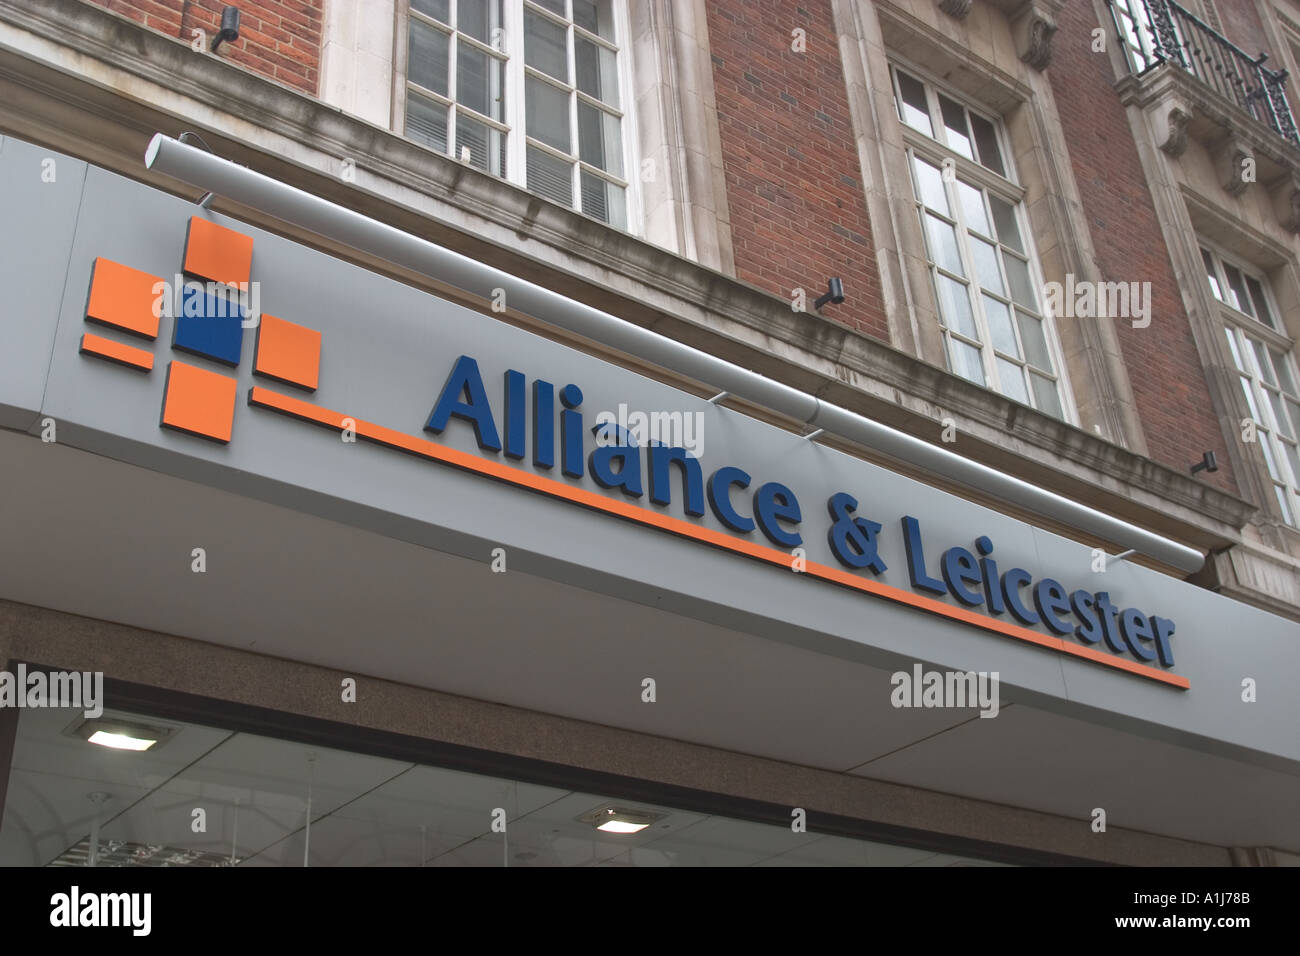 Alliance and Leicester Building Society sign Stock Photo - Alamy